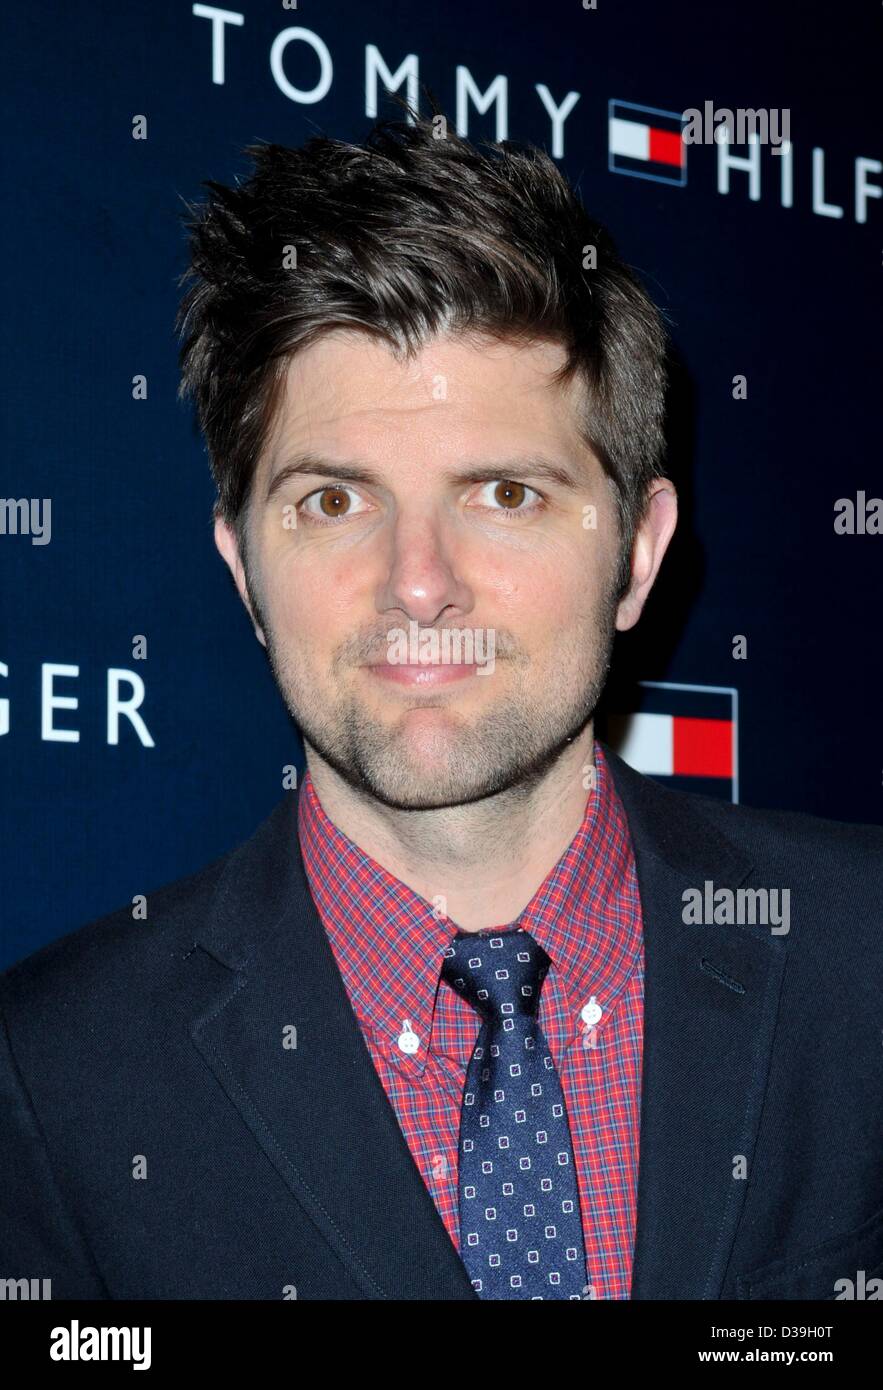 Los Angeles, California, USA. 13th February 2013. Adam Scott at arrivals for Tommy Hilfiger West Coast Flagship Store Opening, Tommy Hilfiger West Hollywood, Los Angeles, CA February 13, 2013. Photo By: Elizabeth Goodenough/Everett Collection/Alamy Live News Stock Photo